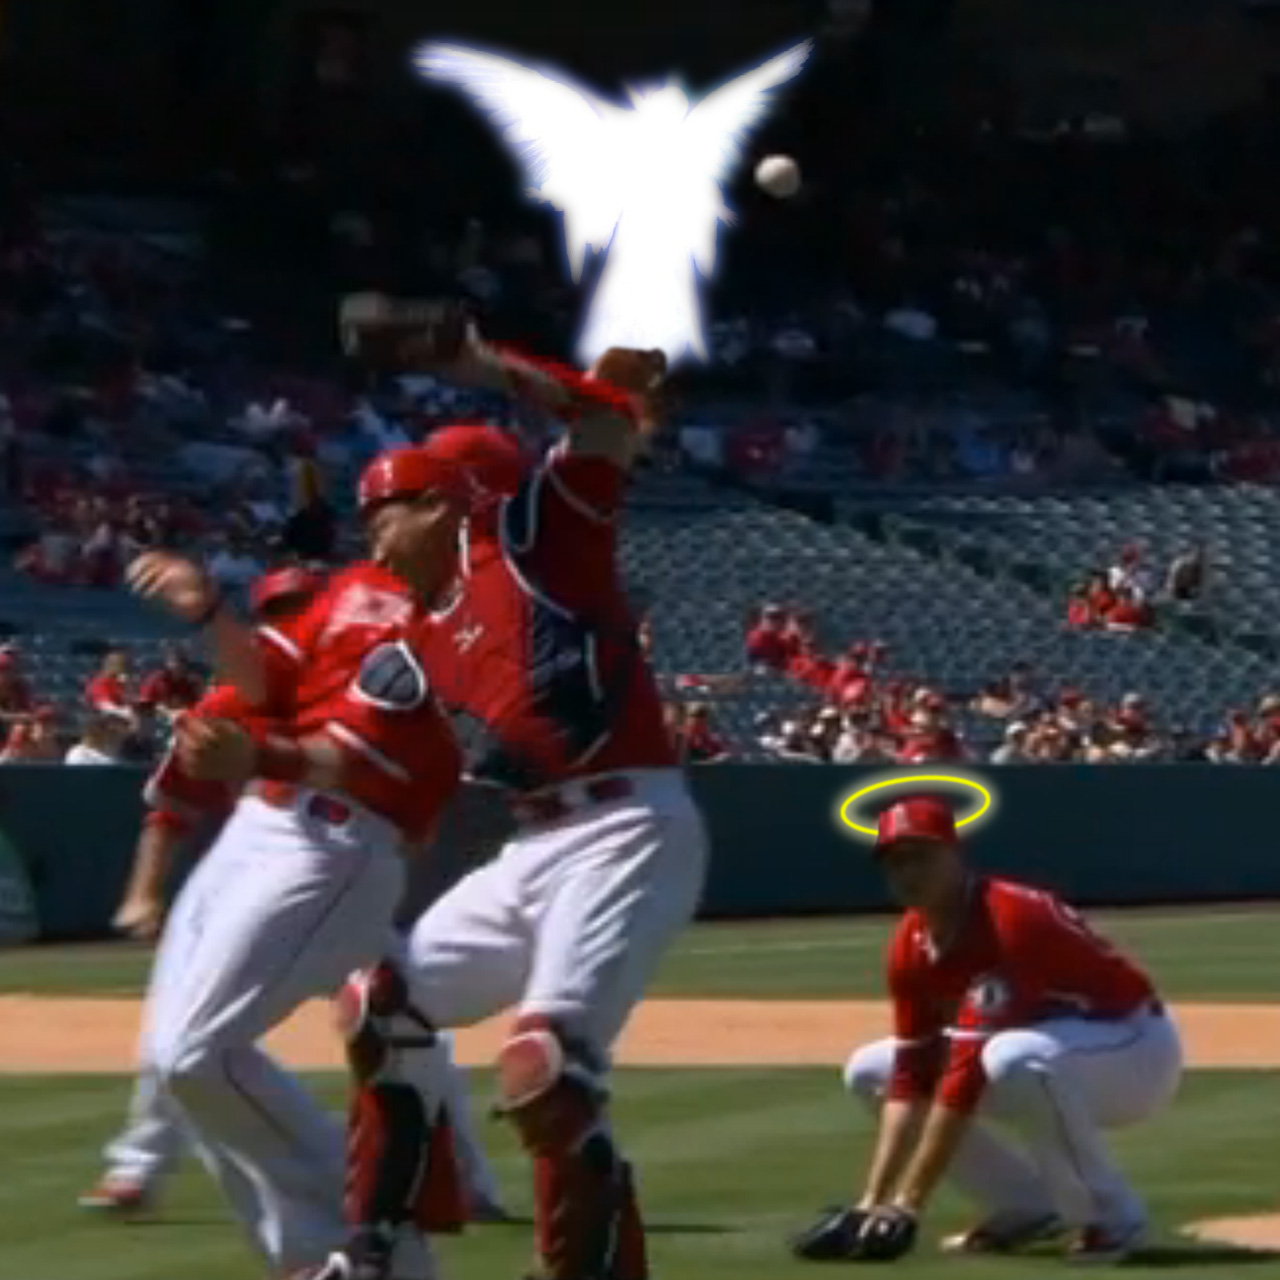 Angels in the Outfield or Infield?